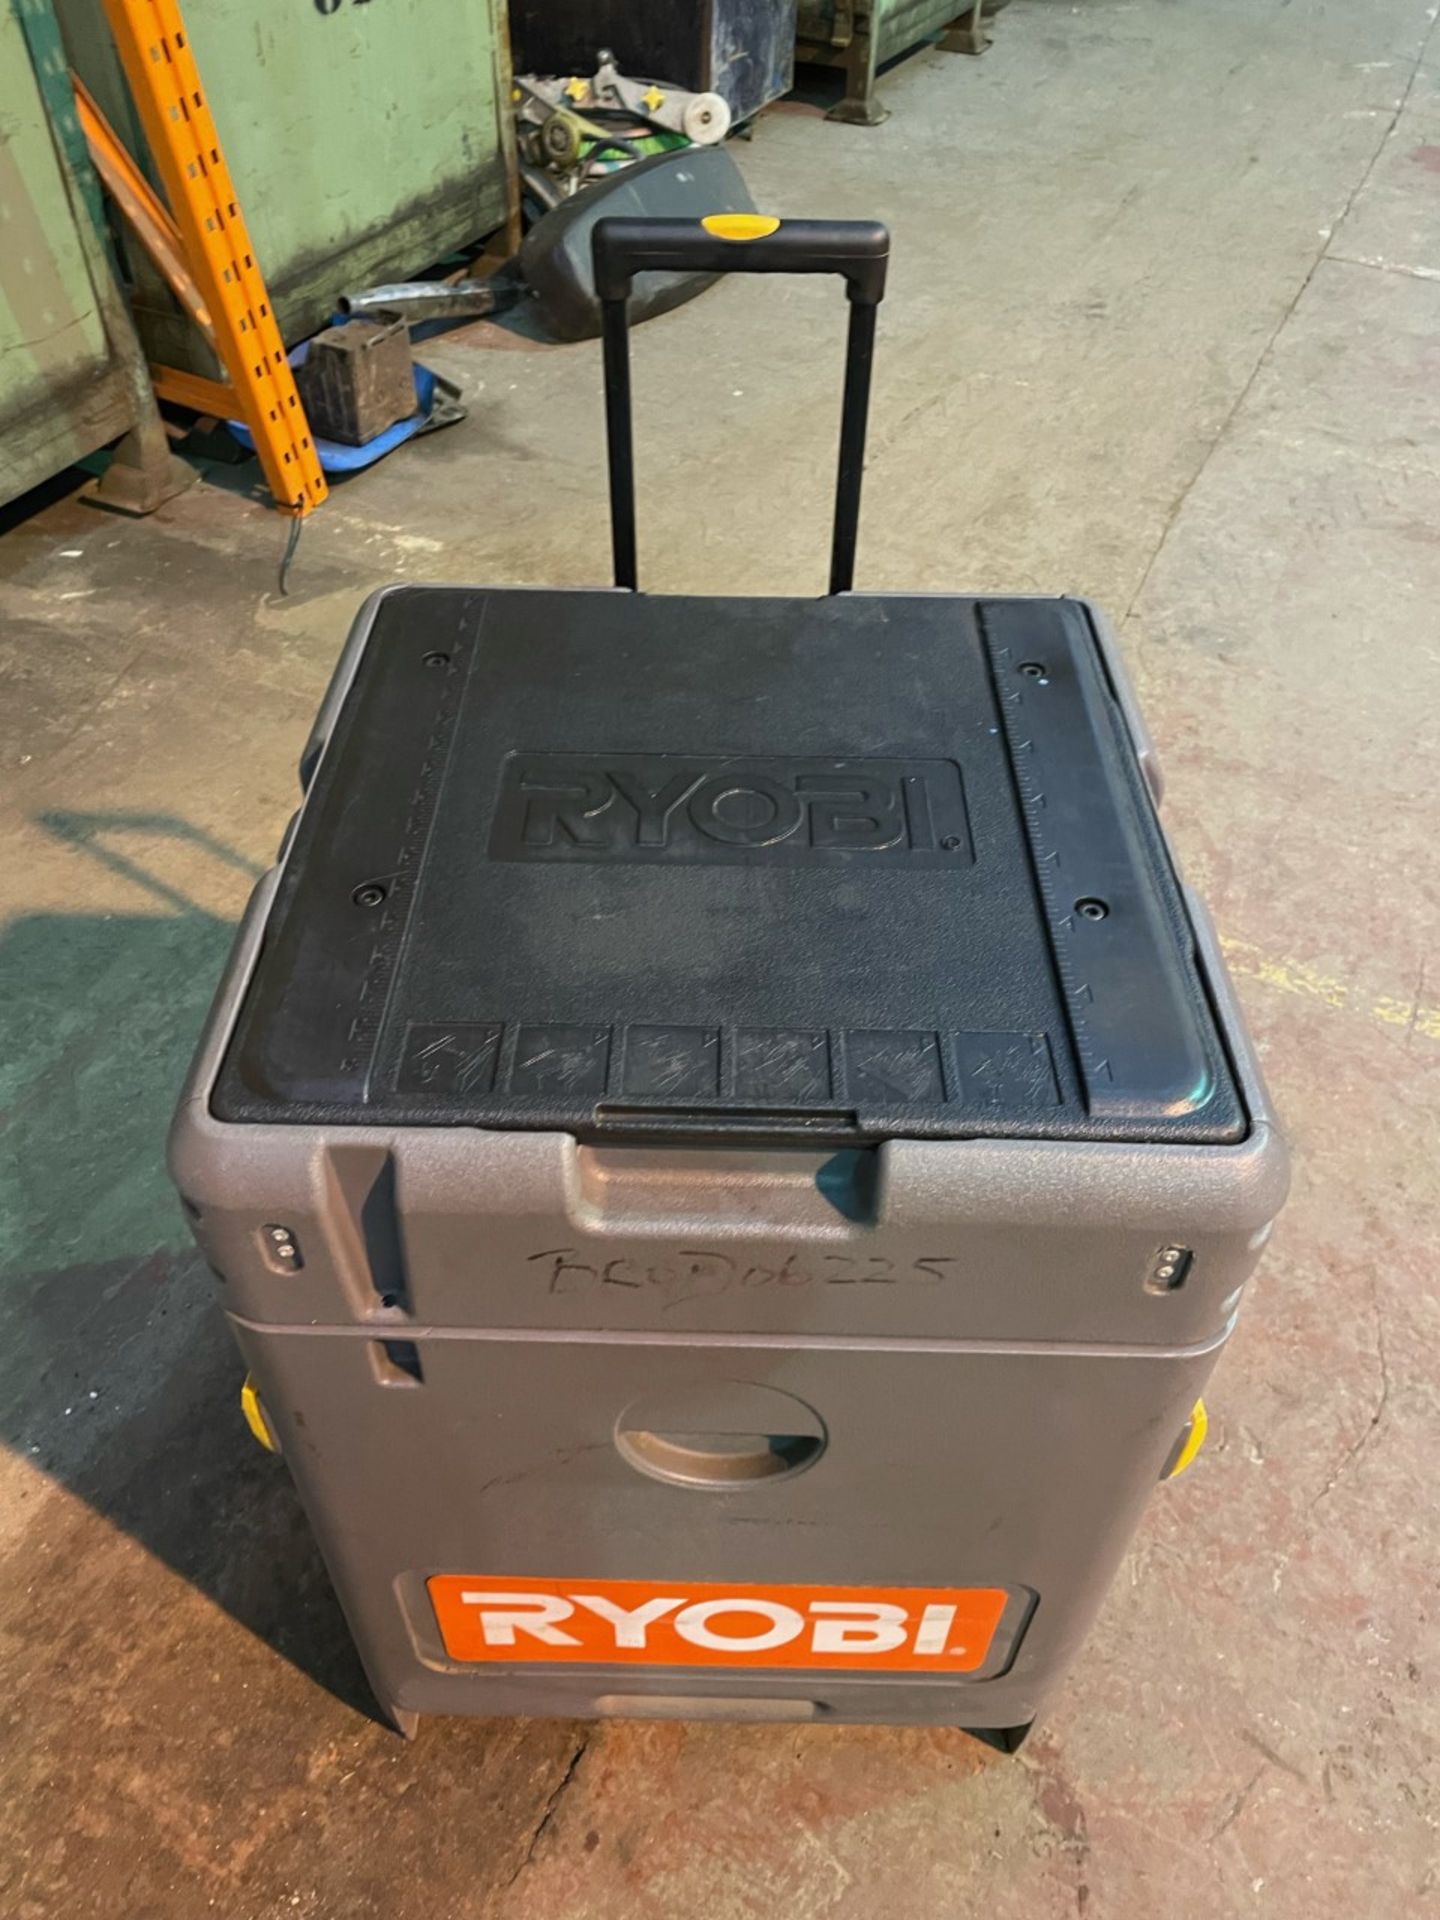 Ryobi mobile work station with 18v mitre saw. Saw blade never been used. Battery not included - Image 4 of 4